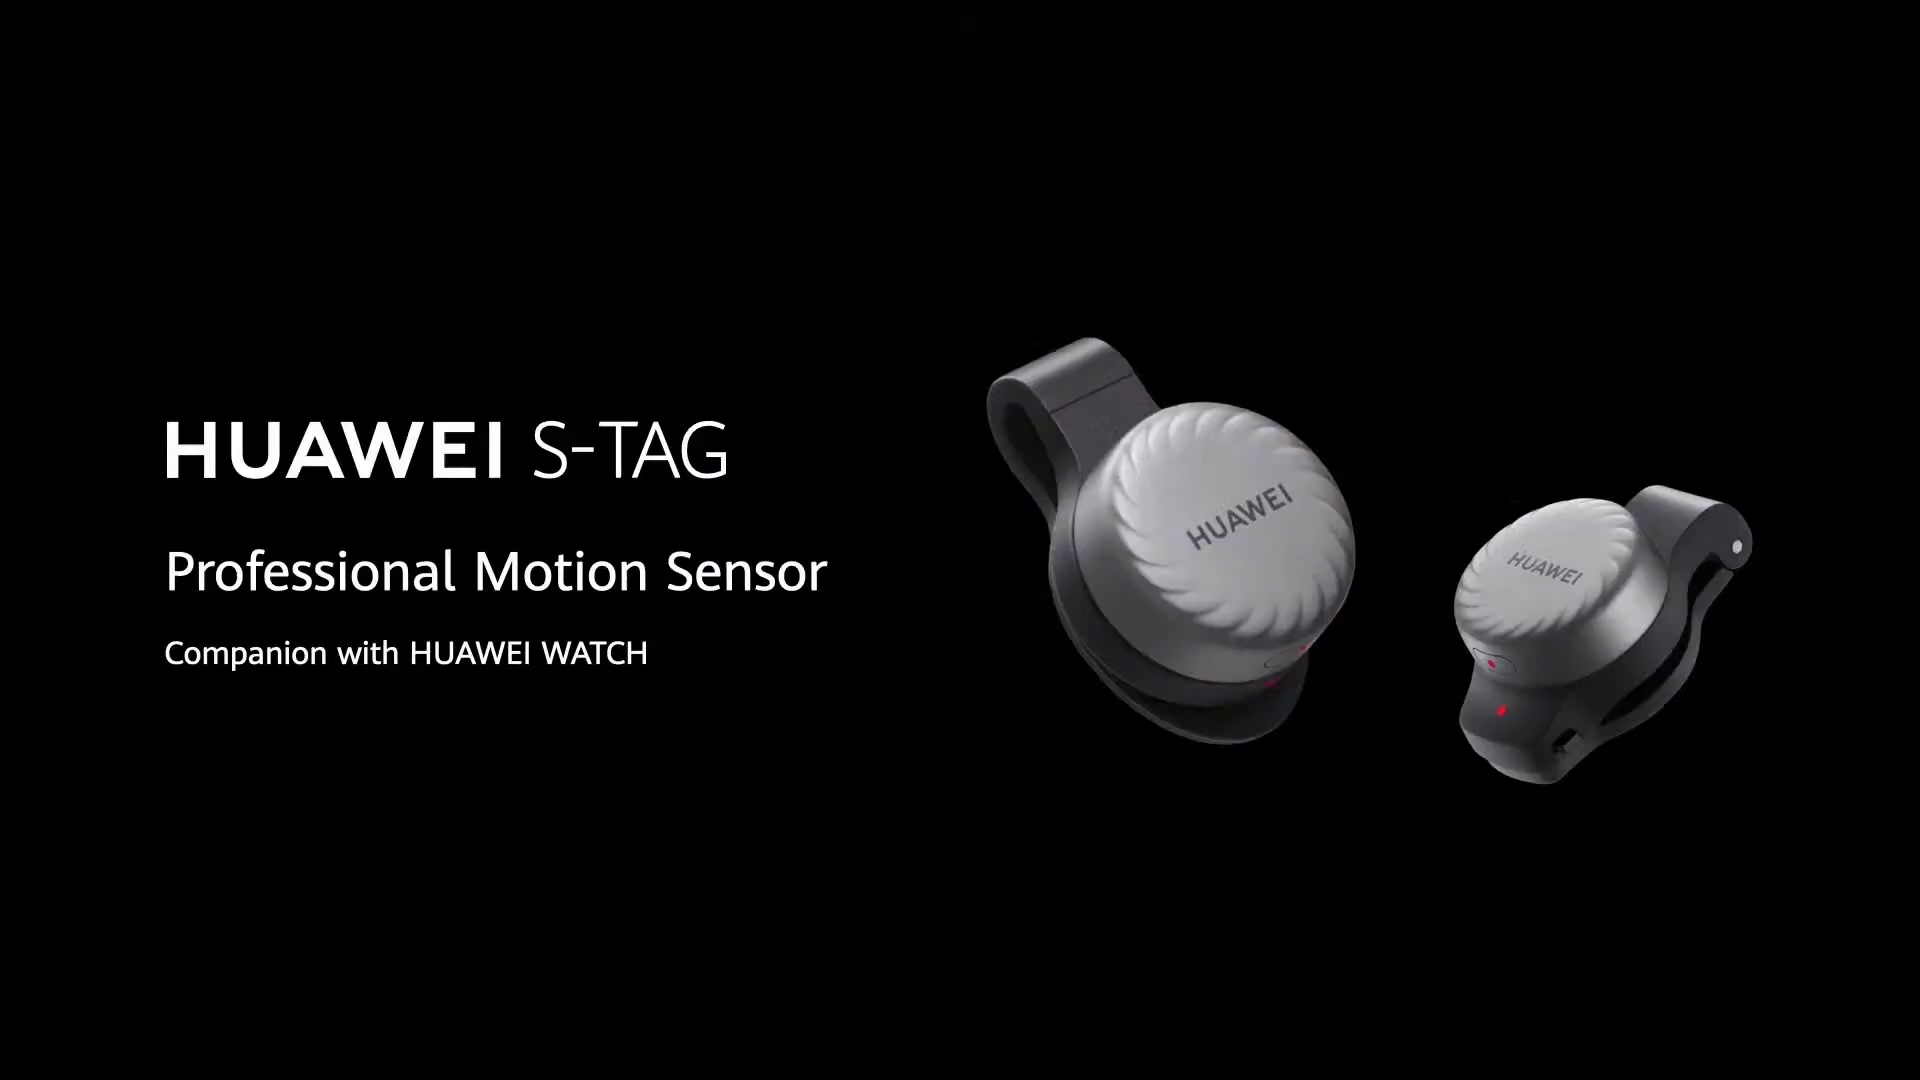 Huawei S-Tag is not a locator, but a great complement to a smartwatch